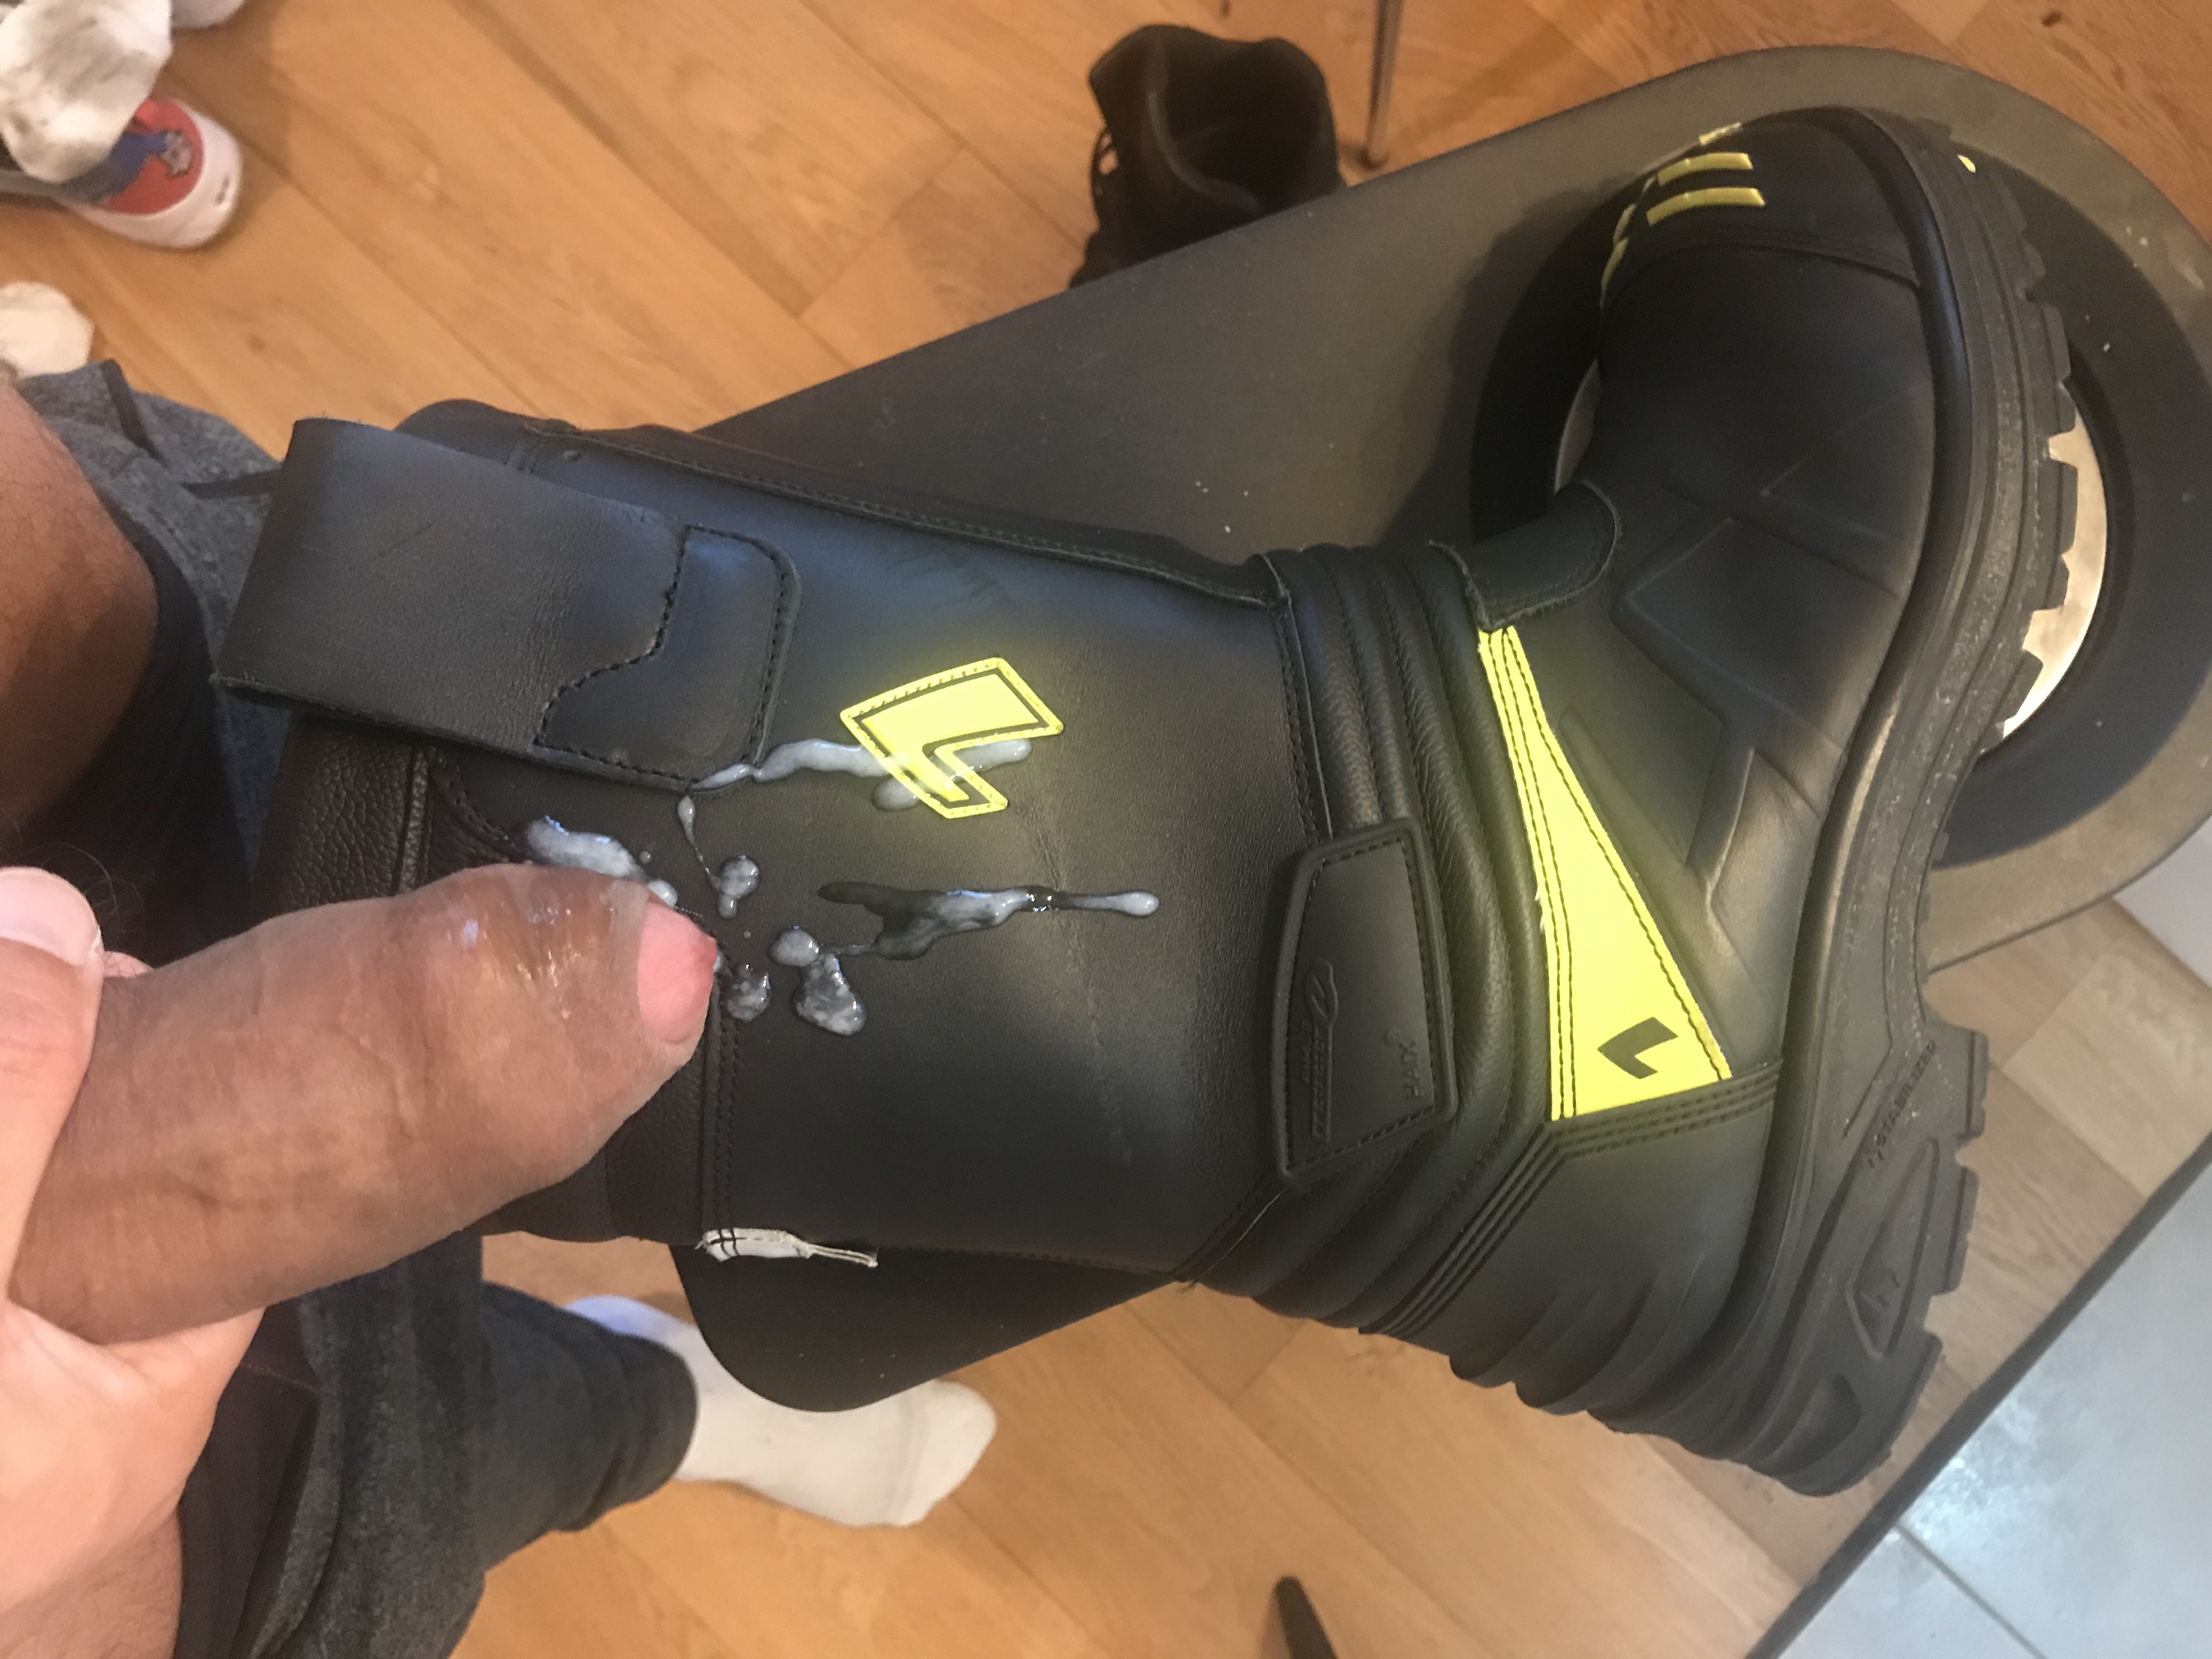 Releasing cum on Haix Fire Eagle Vario size 46 boots !!